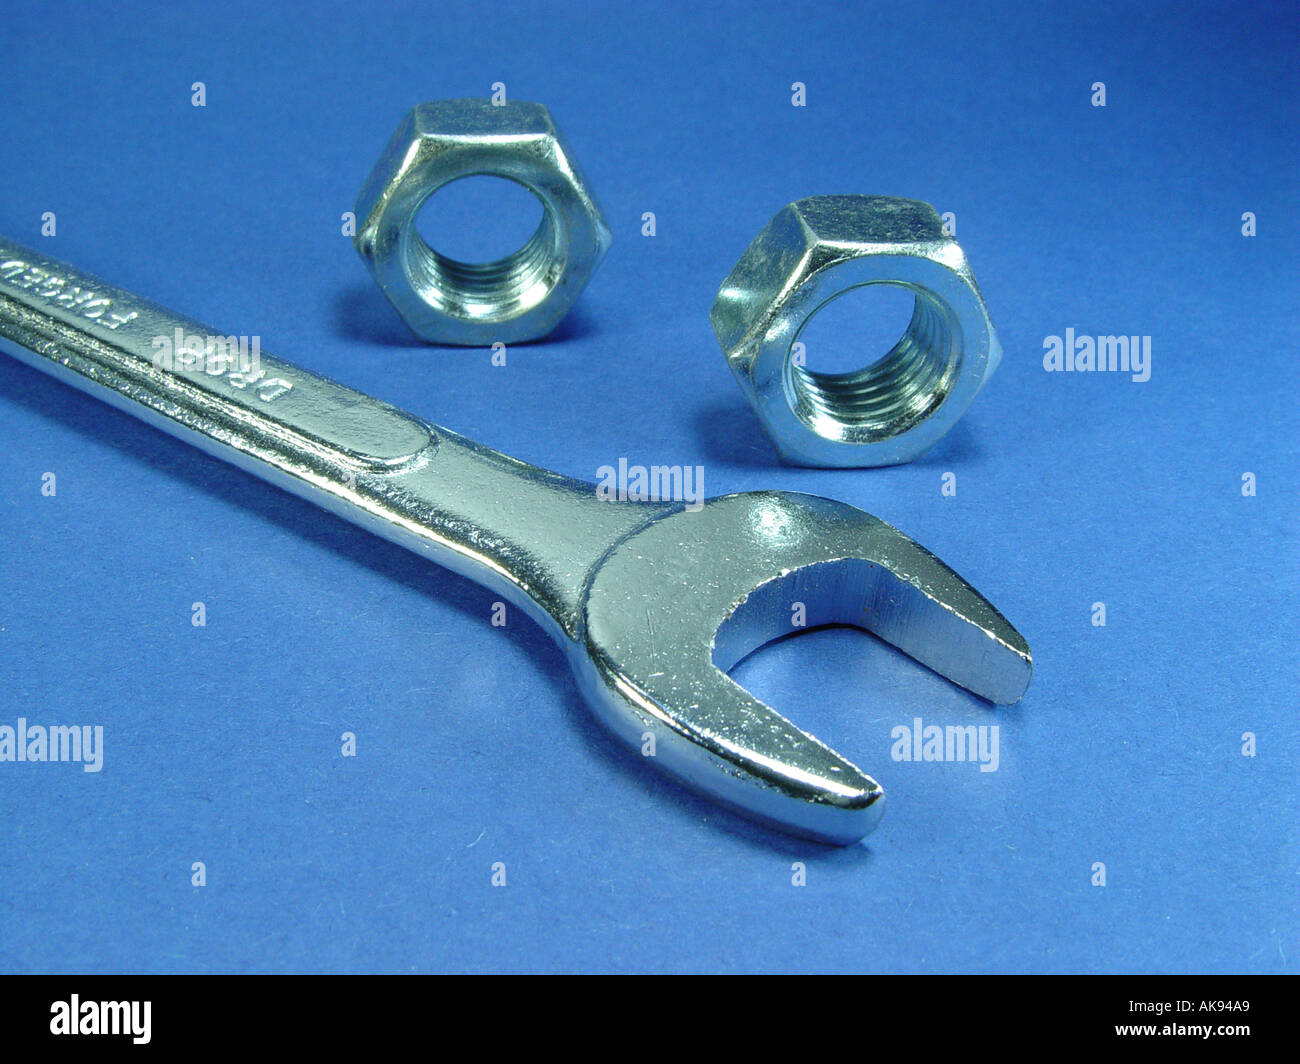 Tool as symbol for work Stock Photo